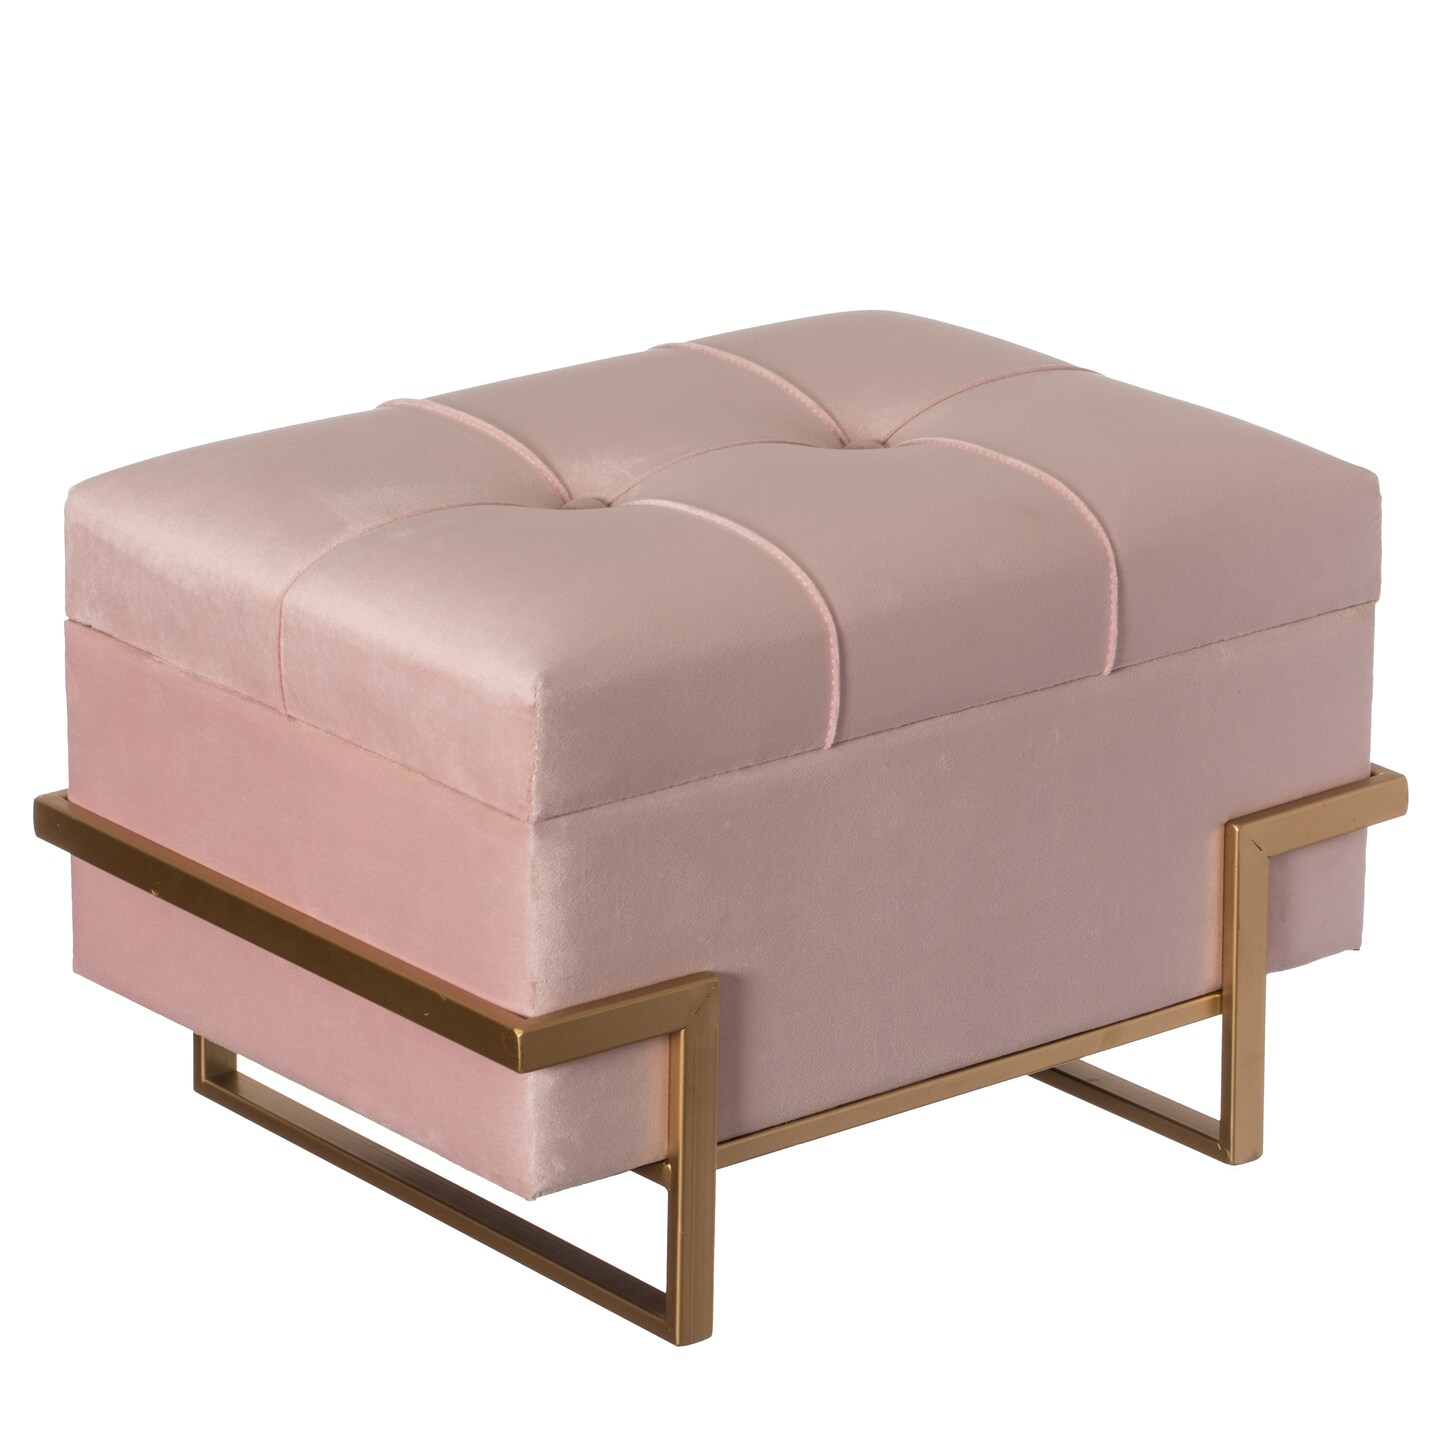 Rectangle Velvet Storage Ottoman Stool Box with Abstract Golden Legs | Decorative Sitting Bench for Living Room Home Decor with Unique Base Support